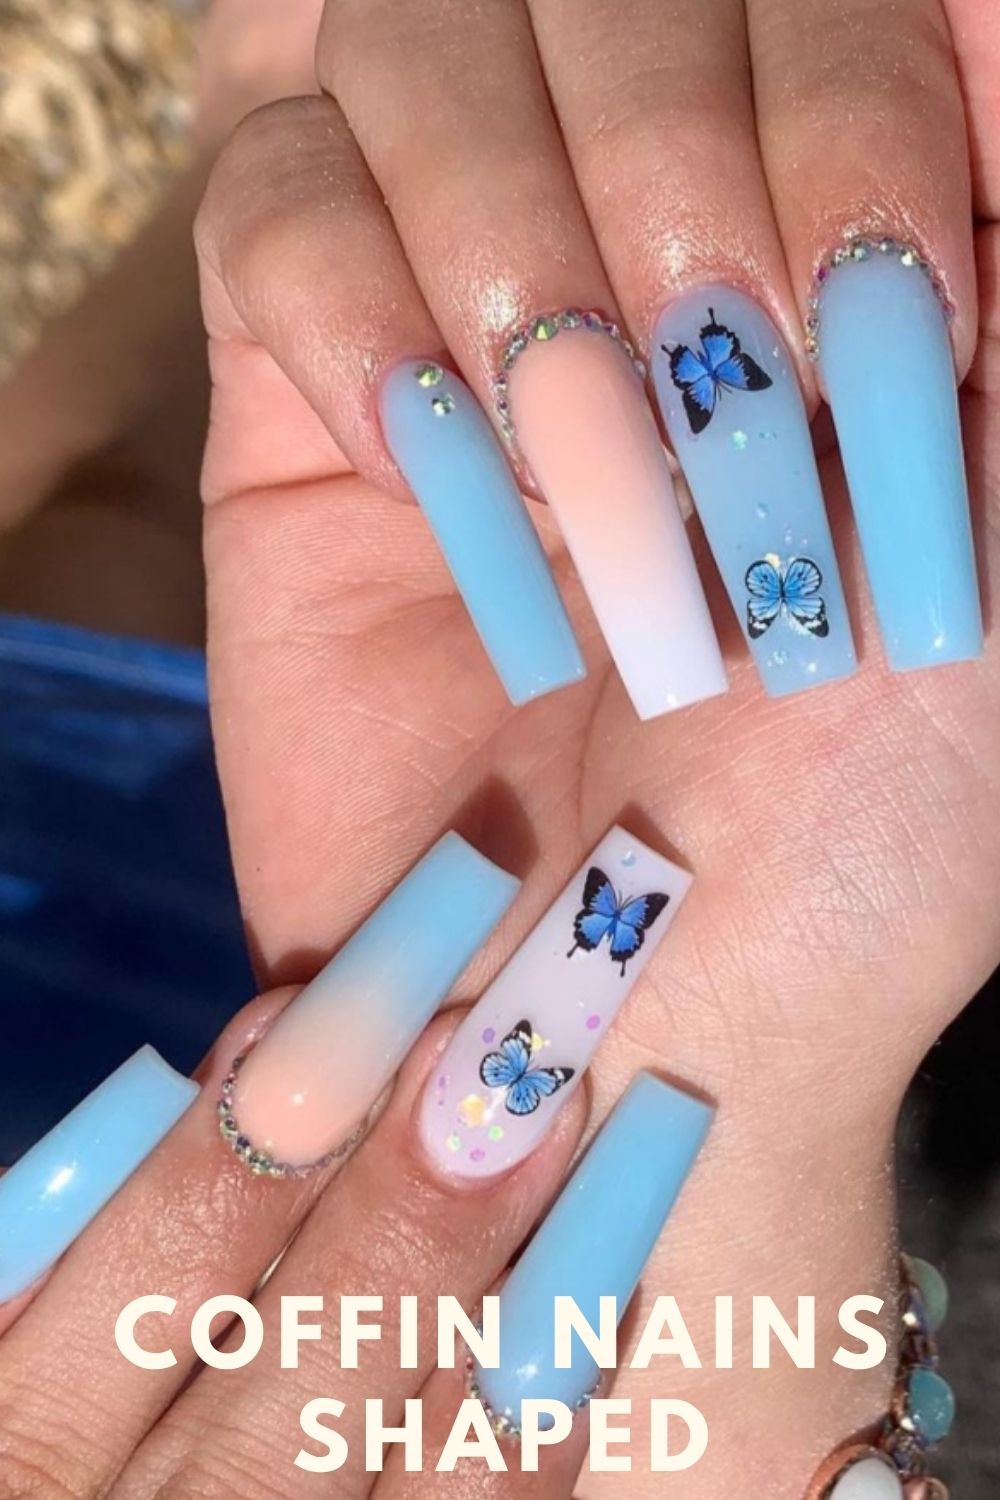 White and light blue coffin nails with butterfly